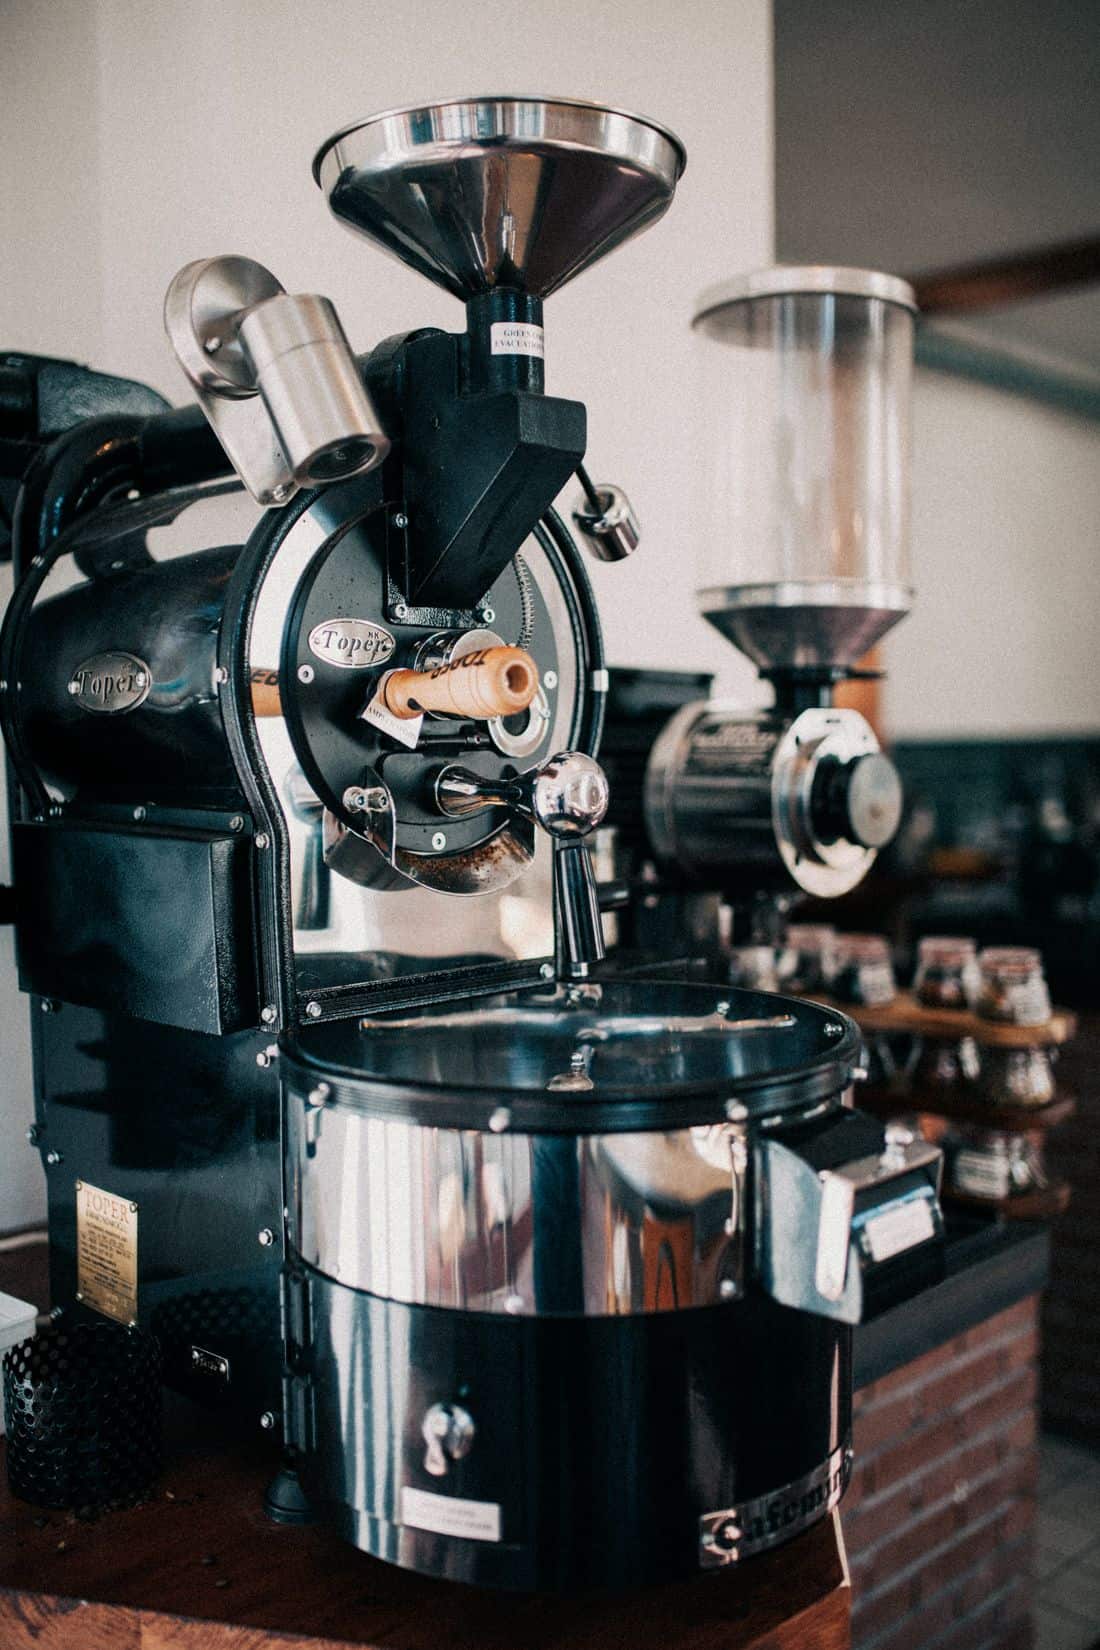 best coffee roaster machine for small business